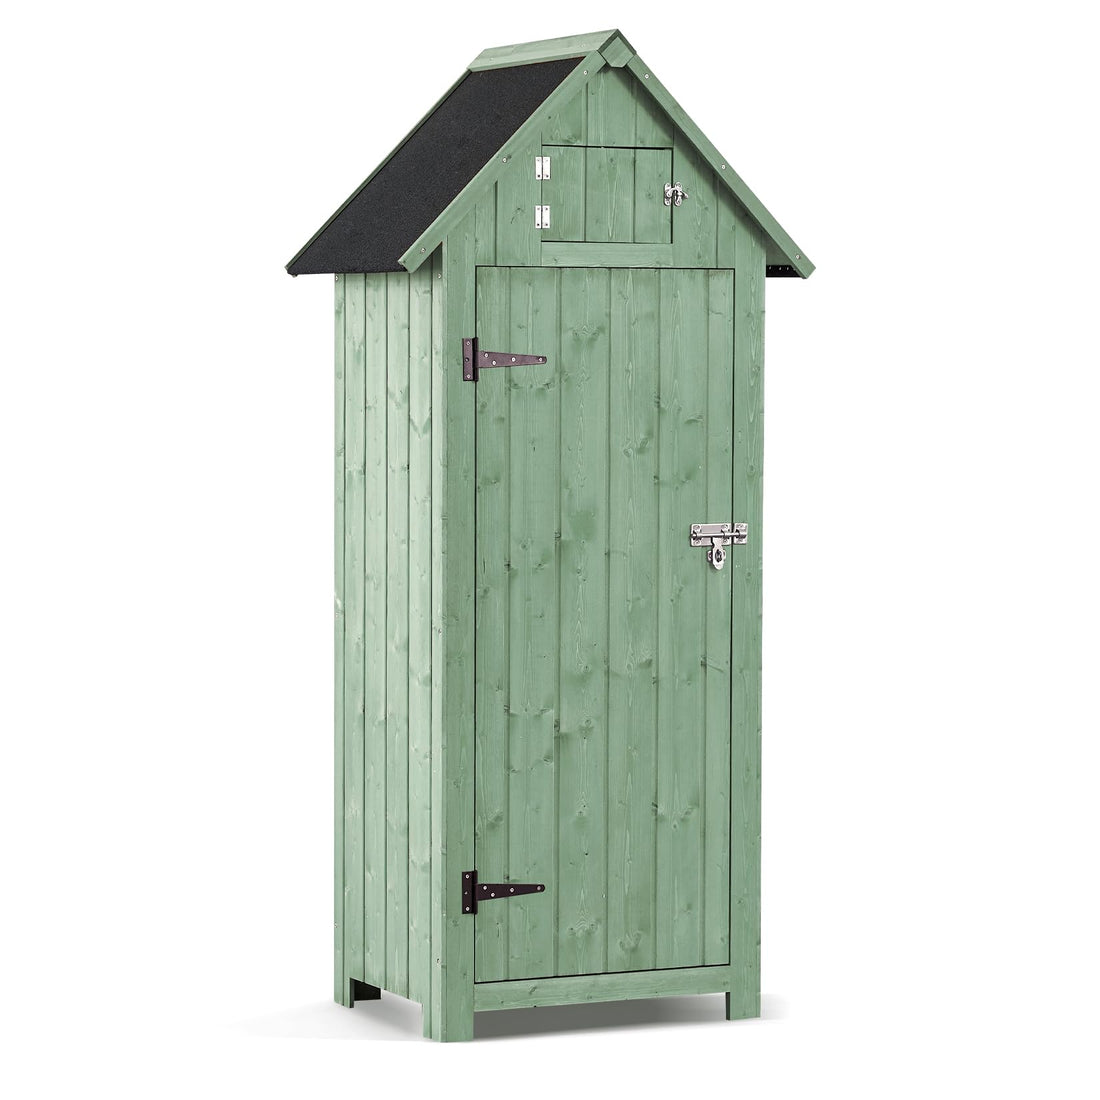 Outdoor Wooden Storage Shed, Garden Wood Tool Cabinet, Solid Sheds & Outdoor Storage Clearance, Waterproof Sheds with Shelf and Locking Latch for Backyard, Hallway, Patio